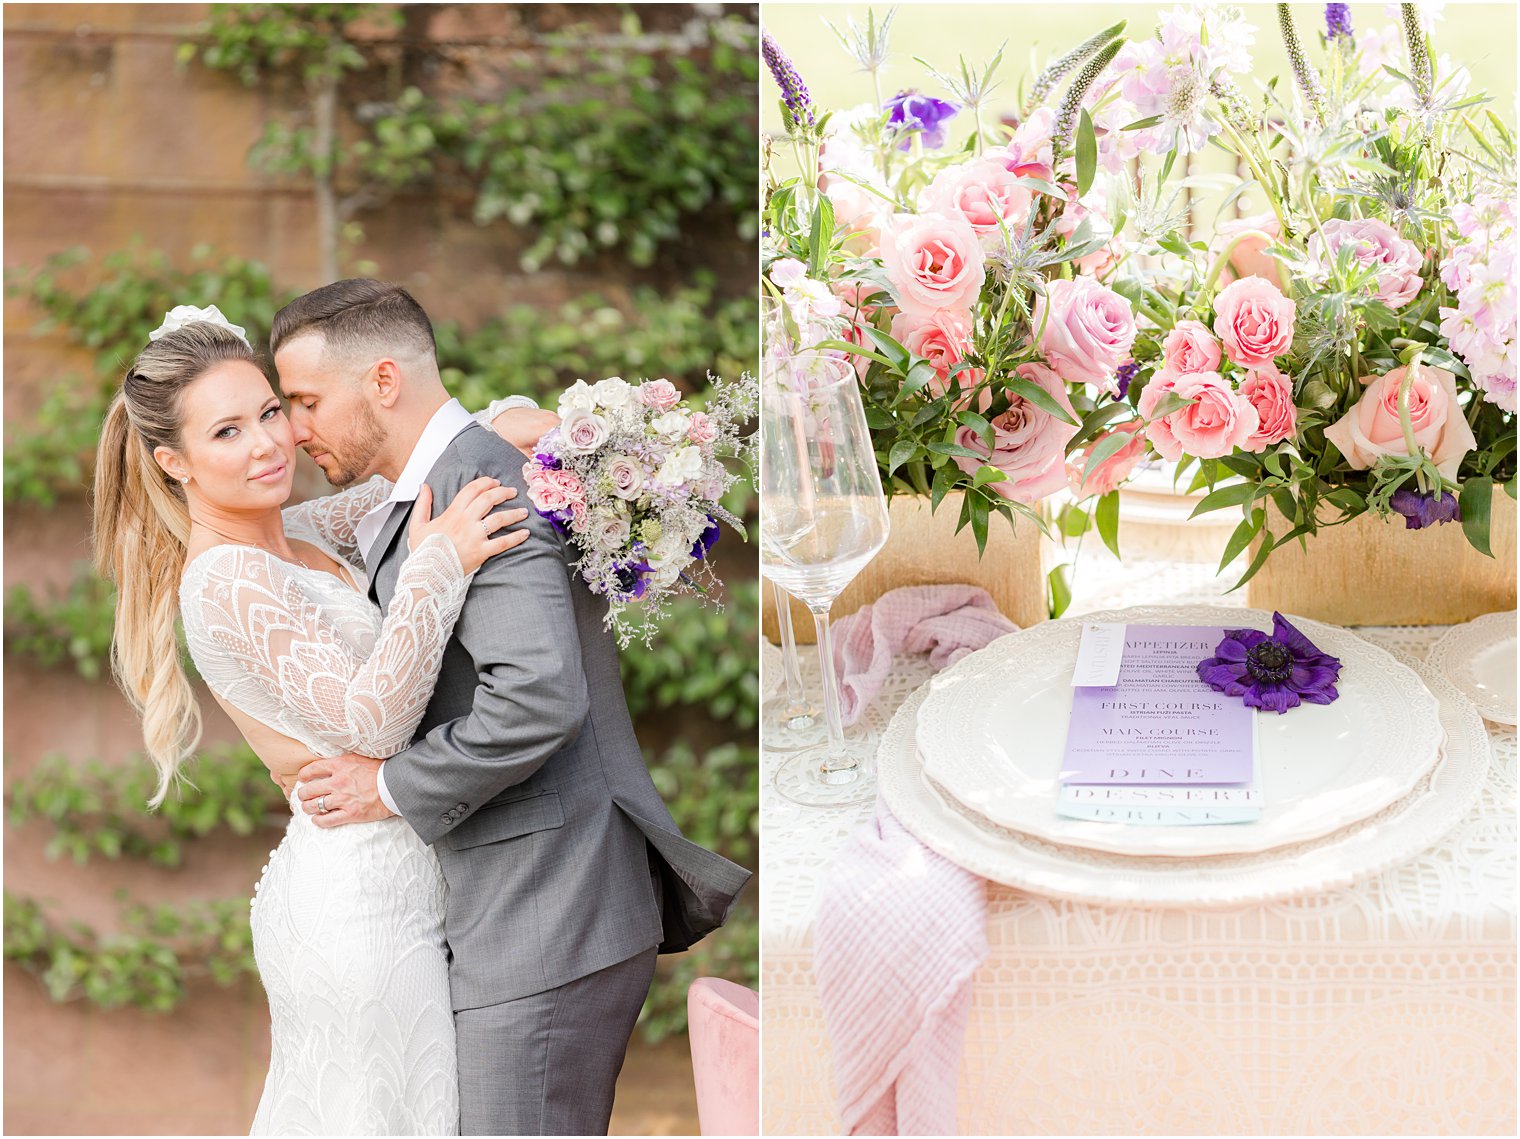 groom hugs bride next to reception display with pink and purple details for wedding minimony at Tyler Gardens